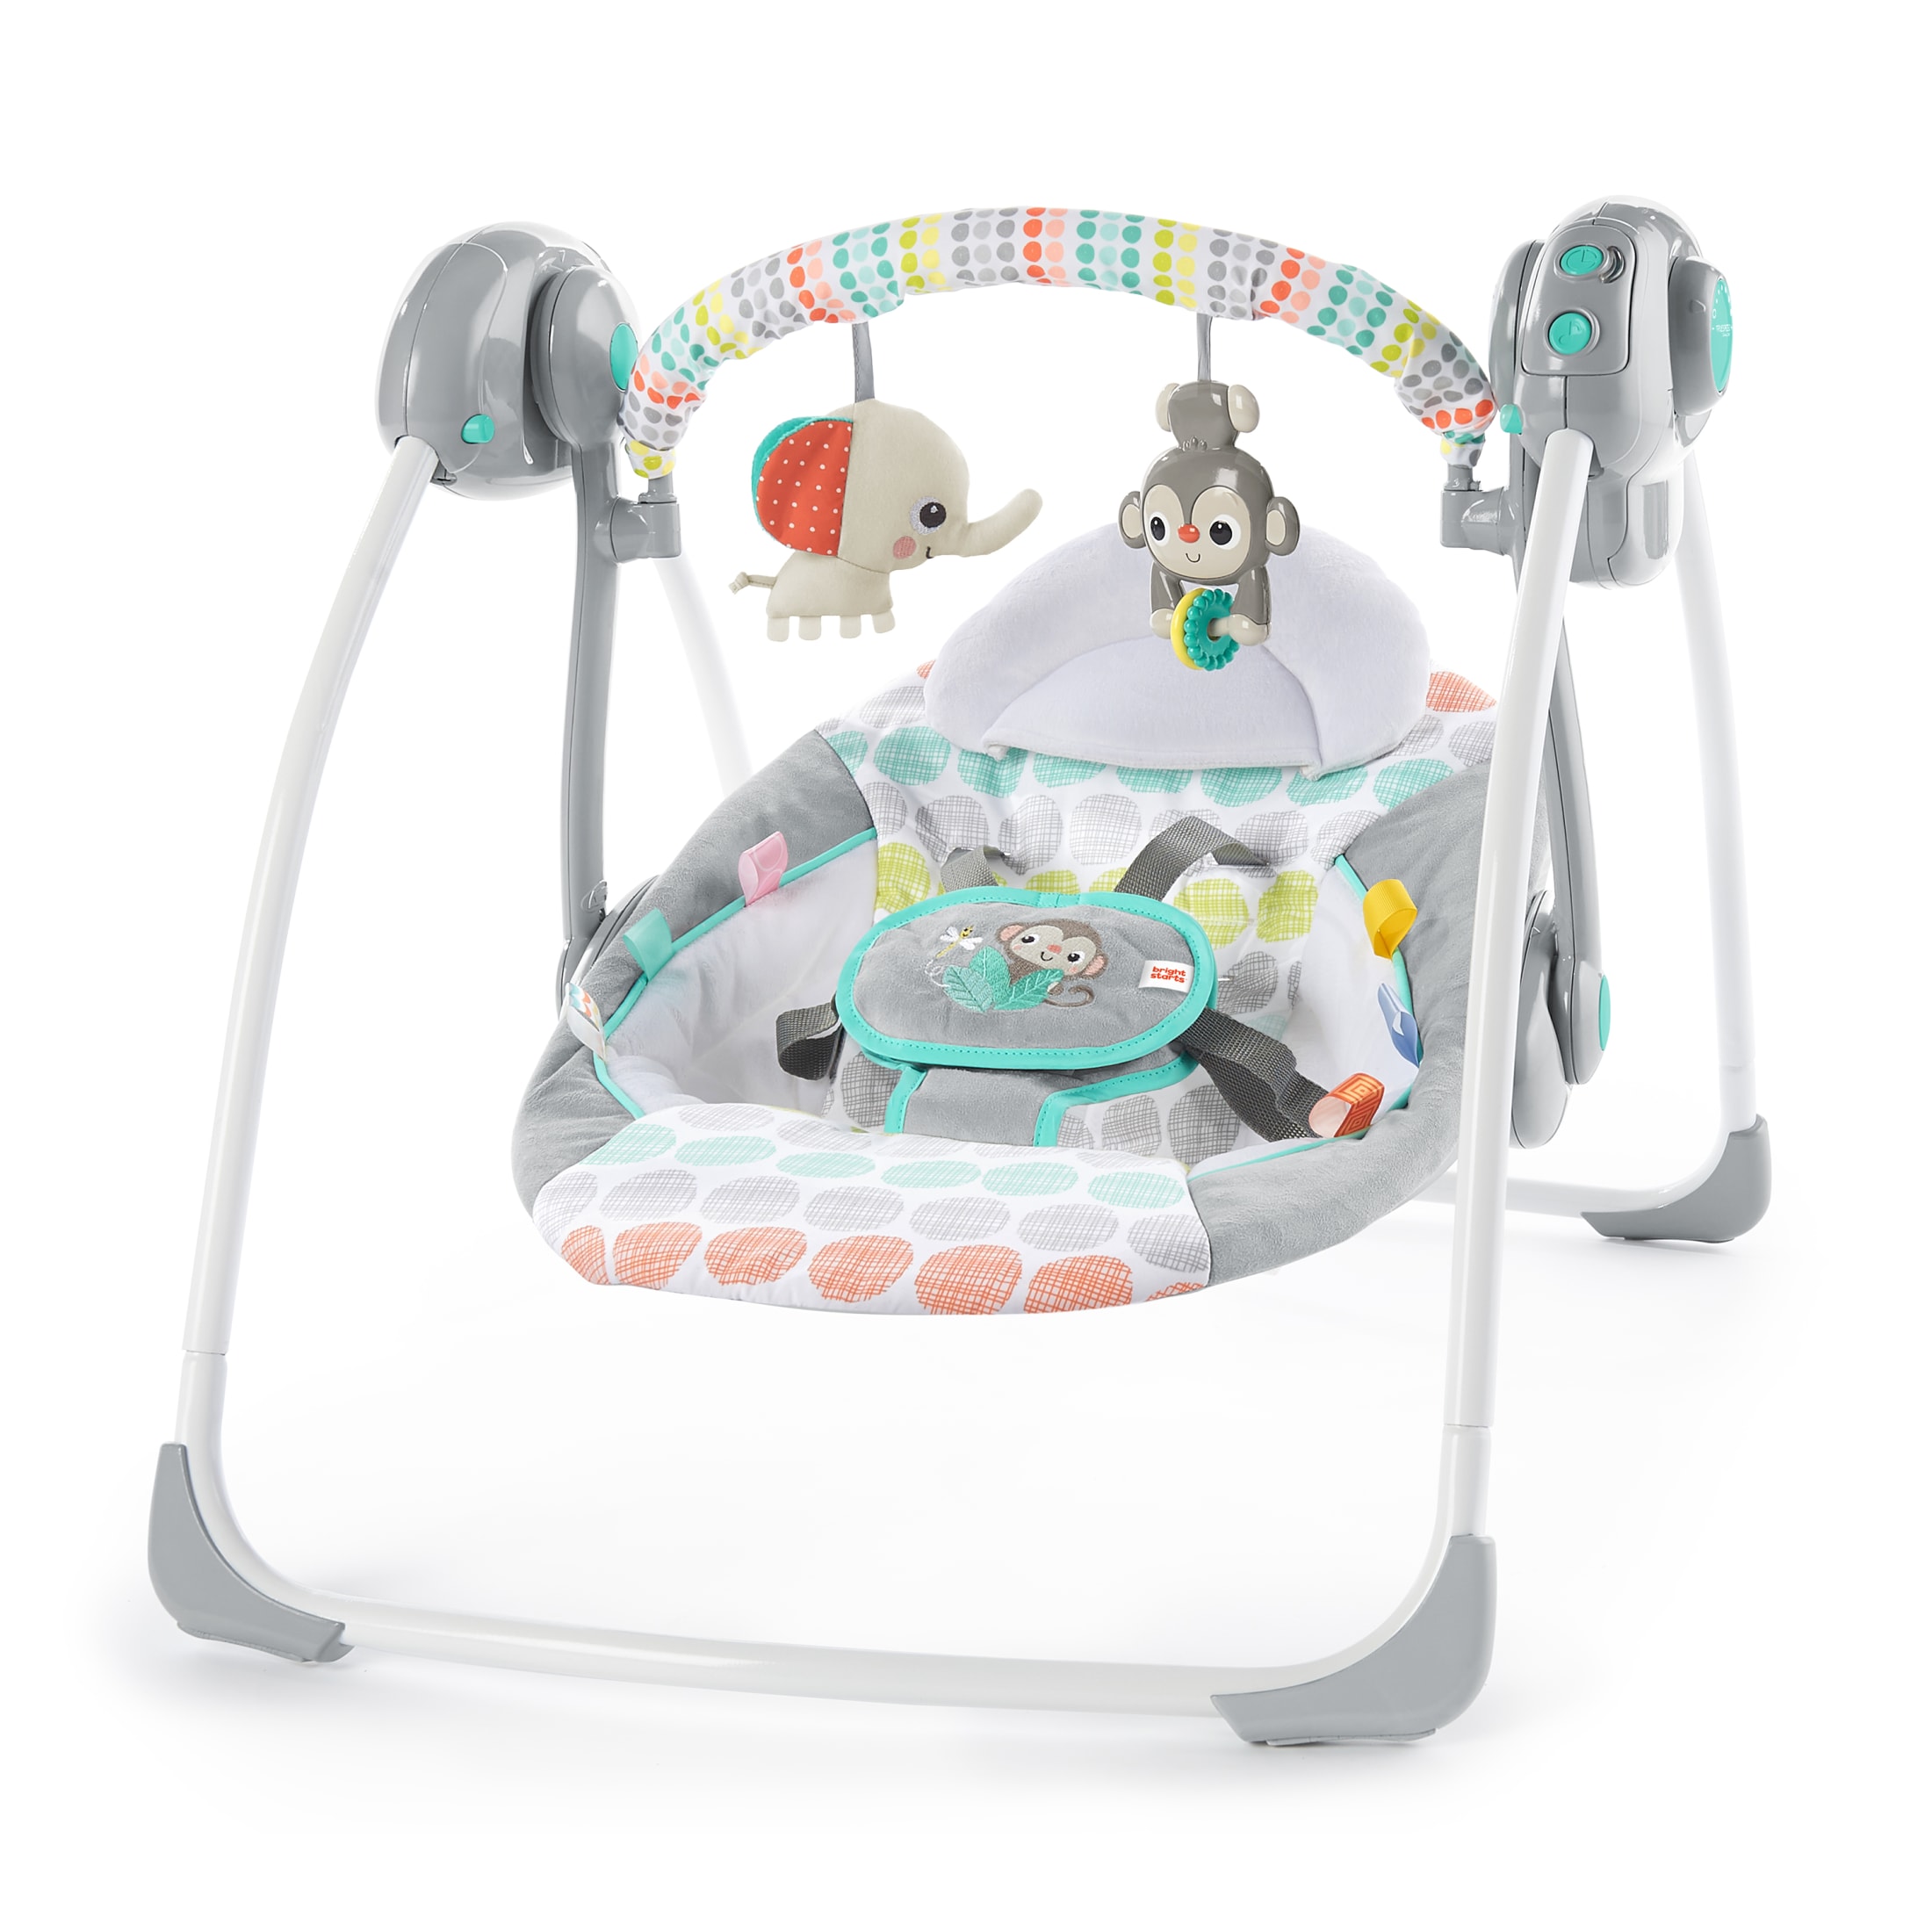 Bright Starts Whimsical Wild Portable Compact Baby Swing with Taggies, Unisex, Newborn and up - image 1 of 17